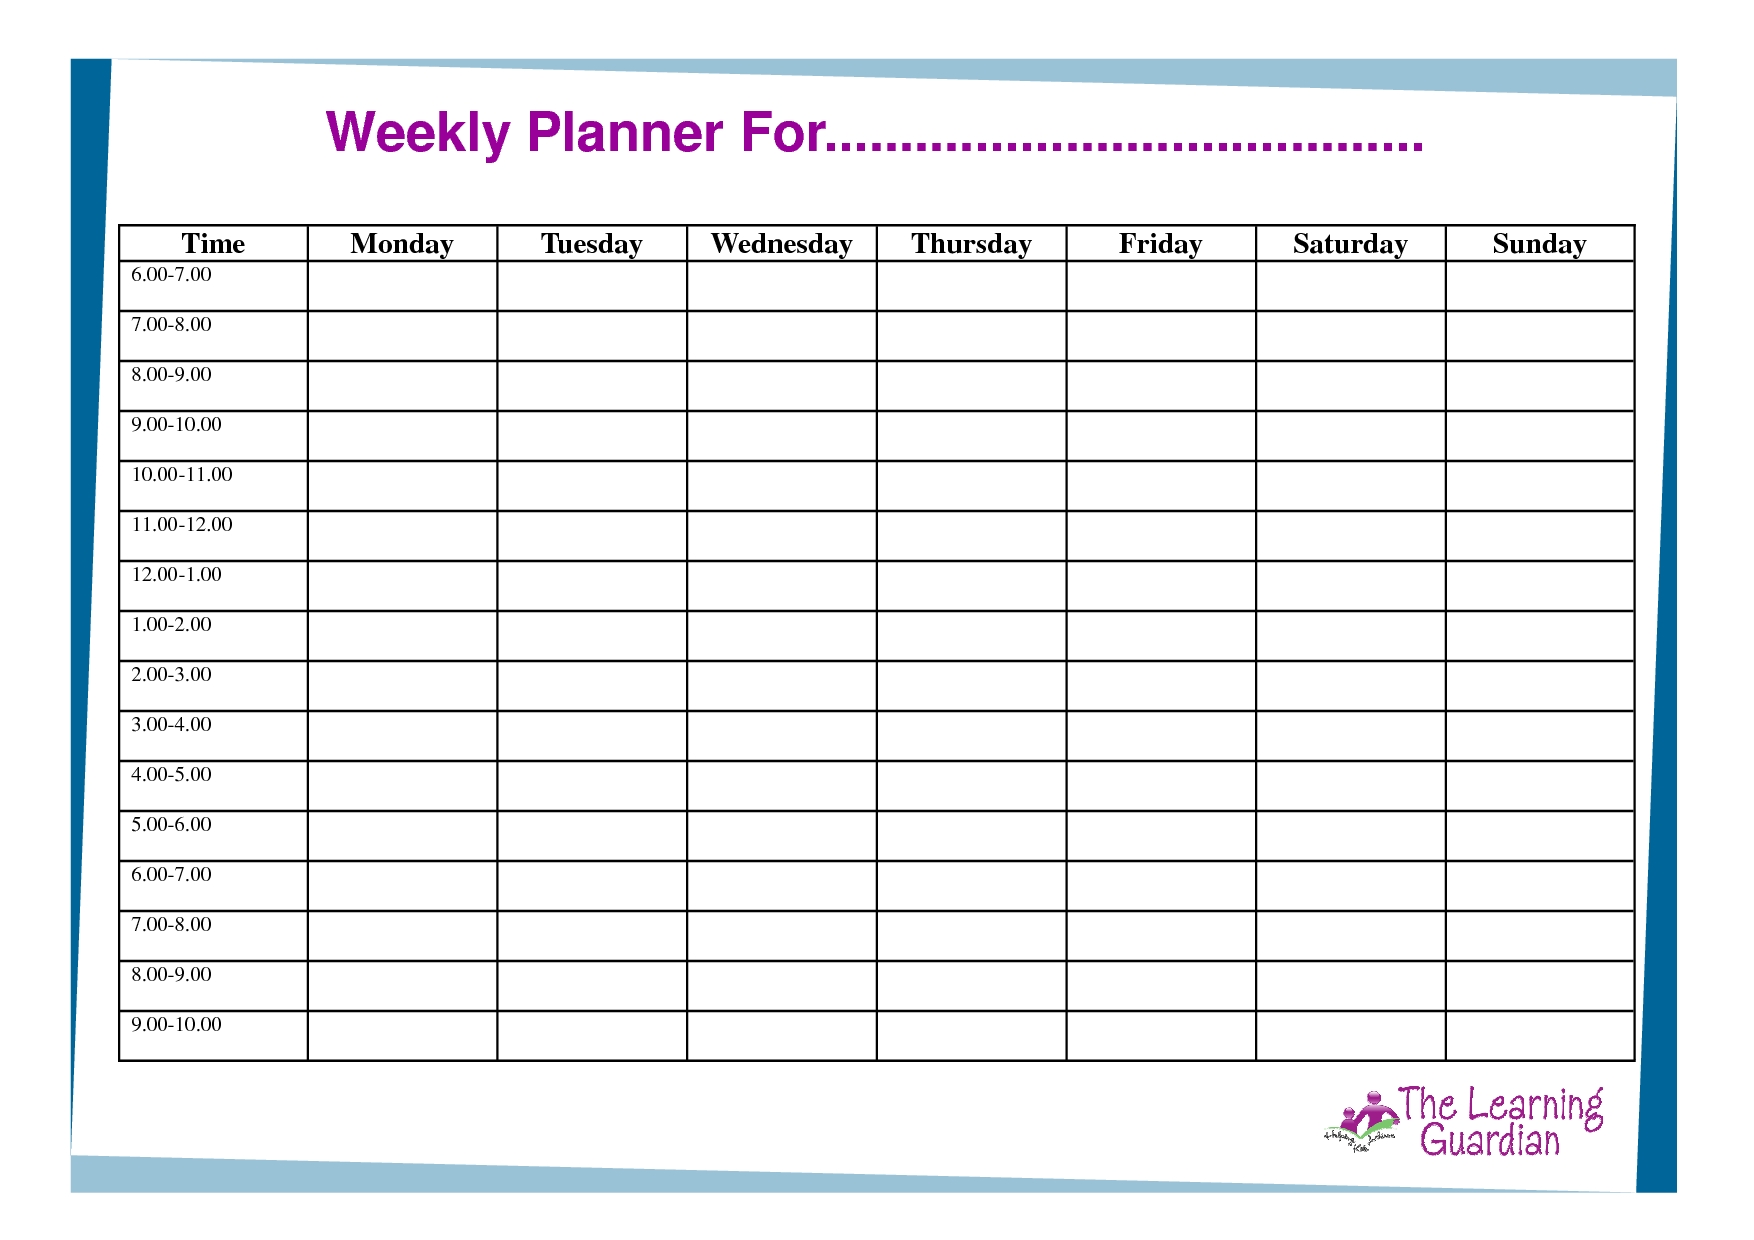 Free Printable Weekly Calendar Templates | Weekly Planner For Time with regard to Monday - Sunday Calendar Template